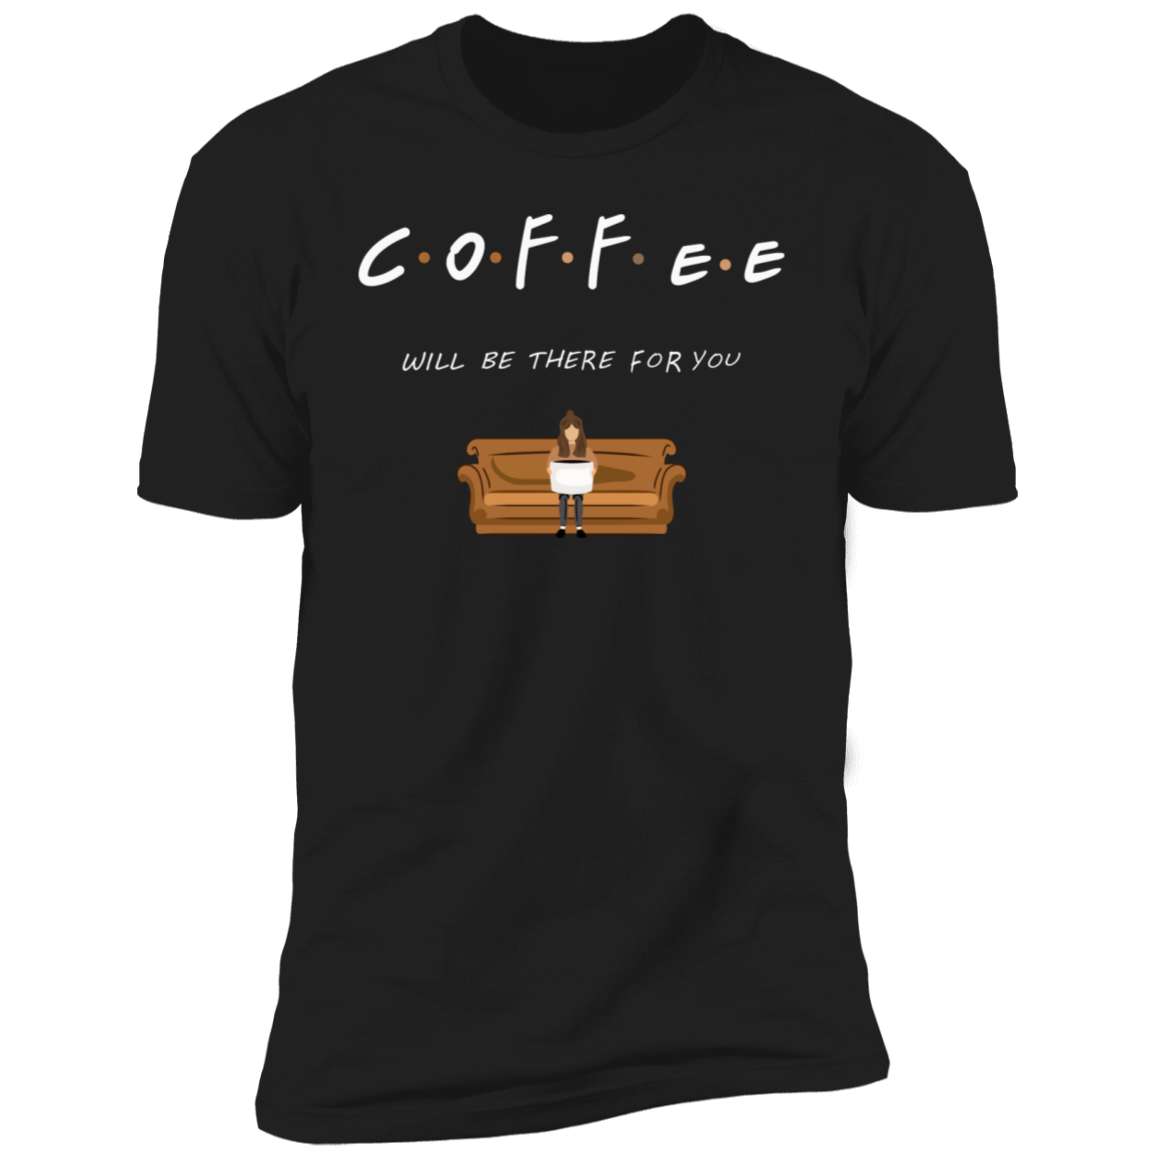 Coffee will be there for you - Girl and coffee, gift for coffee lover